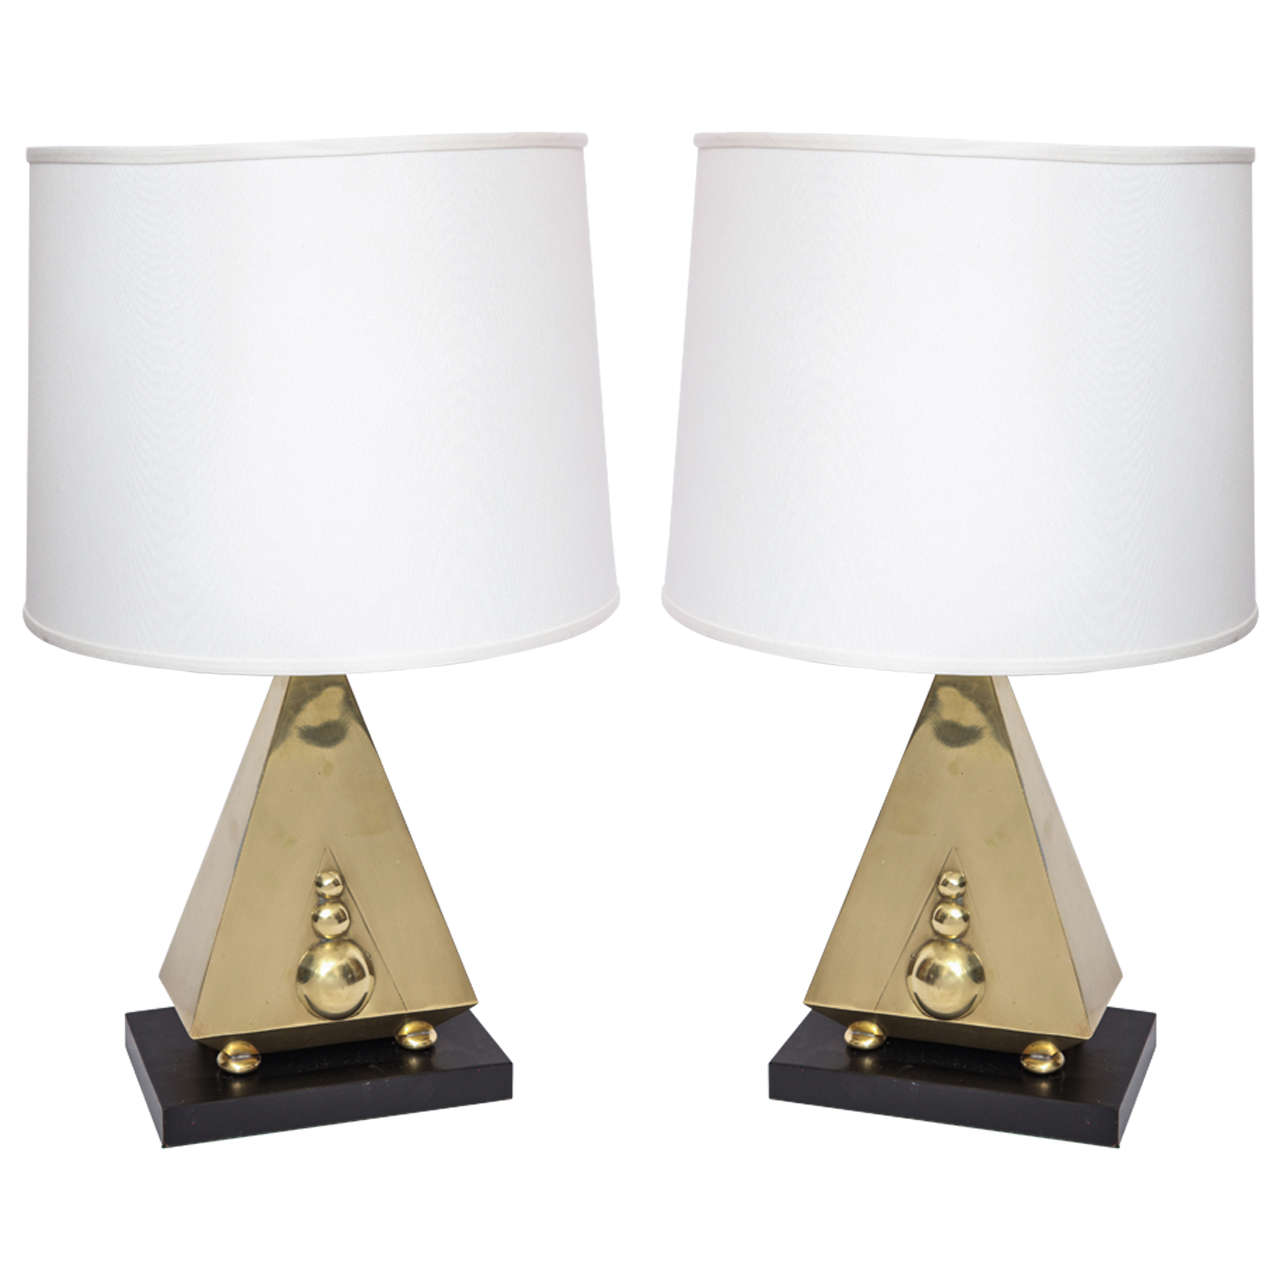 Pair of 1940s Art Moderne Table Lamps Attributed to Hugo Gnam